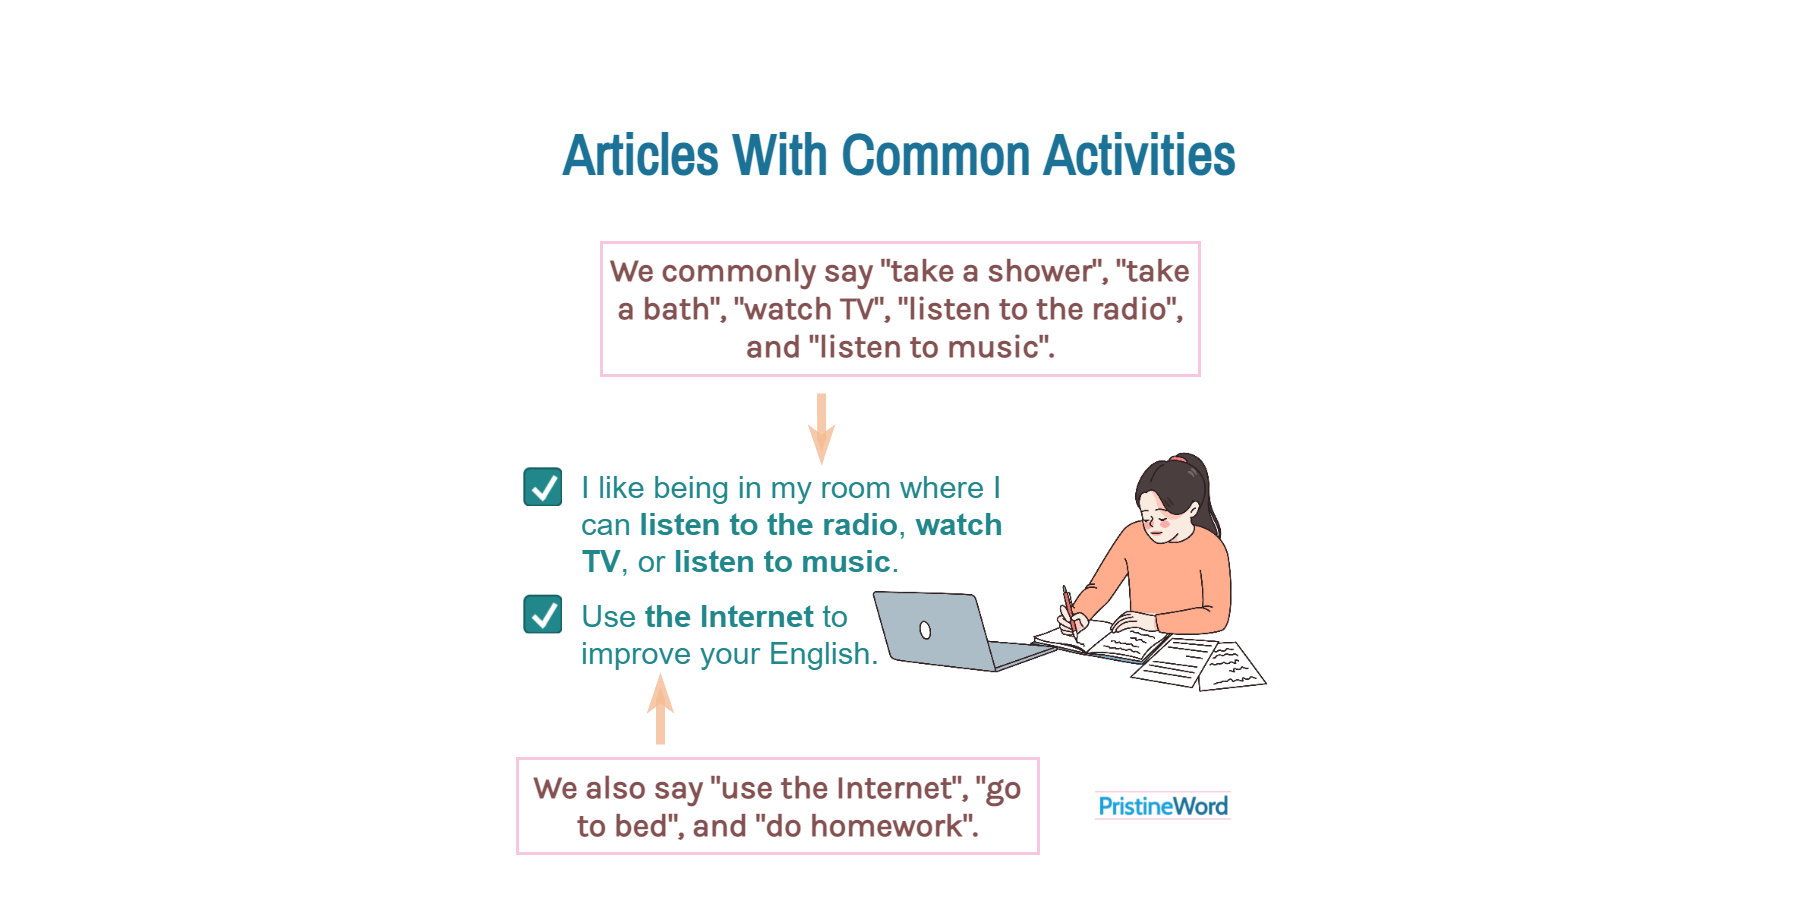 Articles With Common Activities